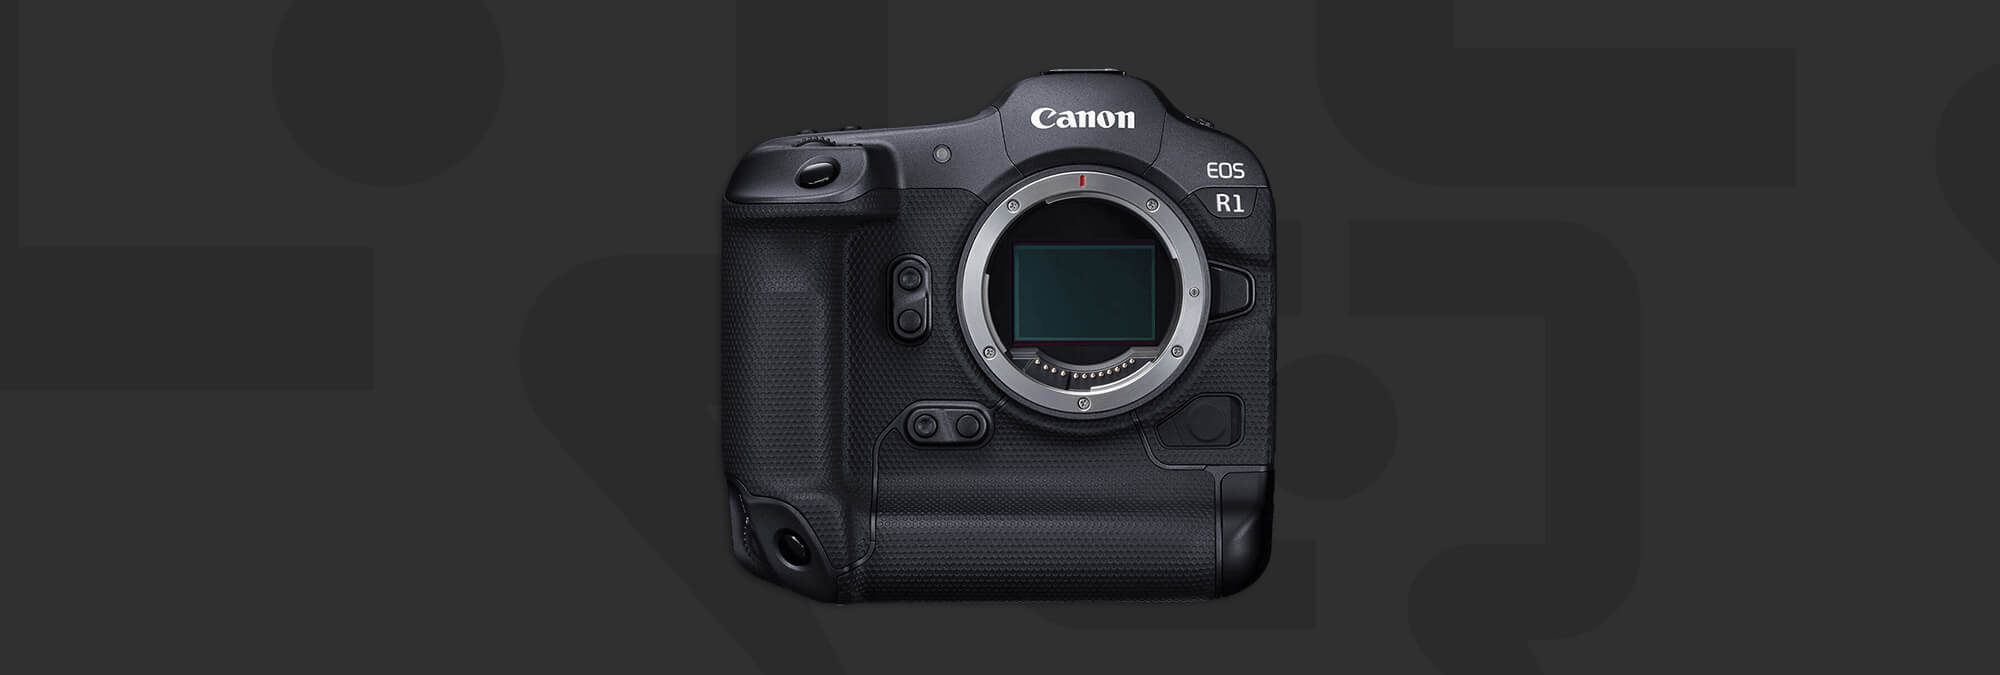 Canon not going global shutter with next round of EOS R camera bodies